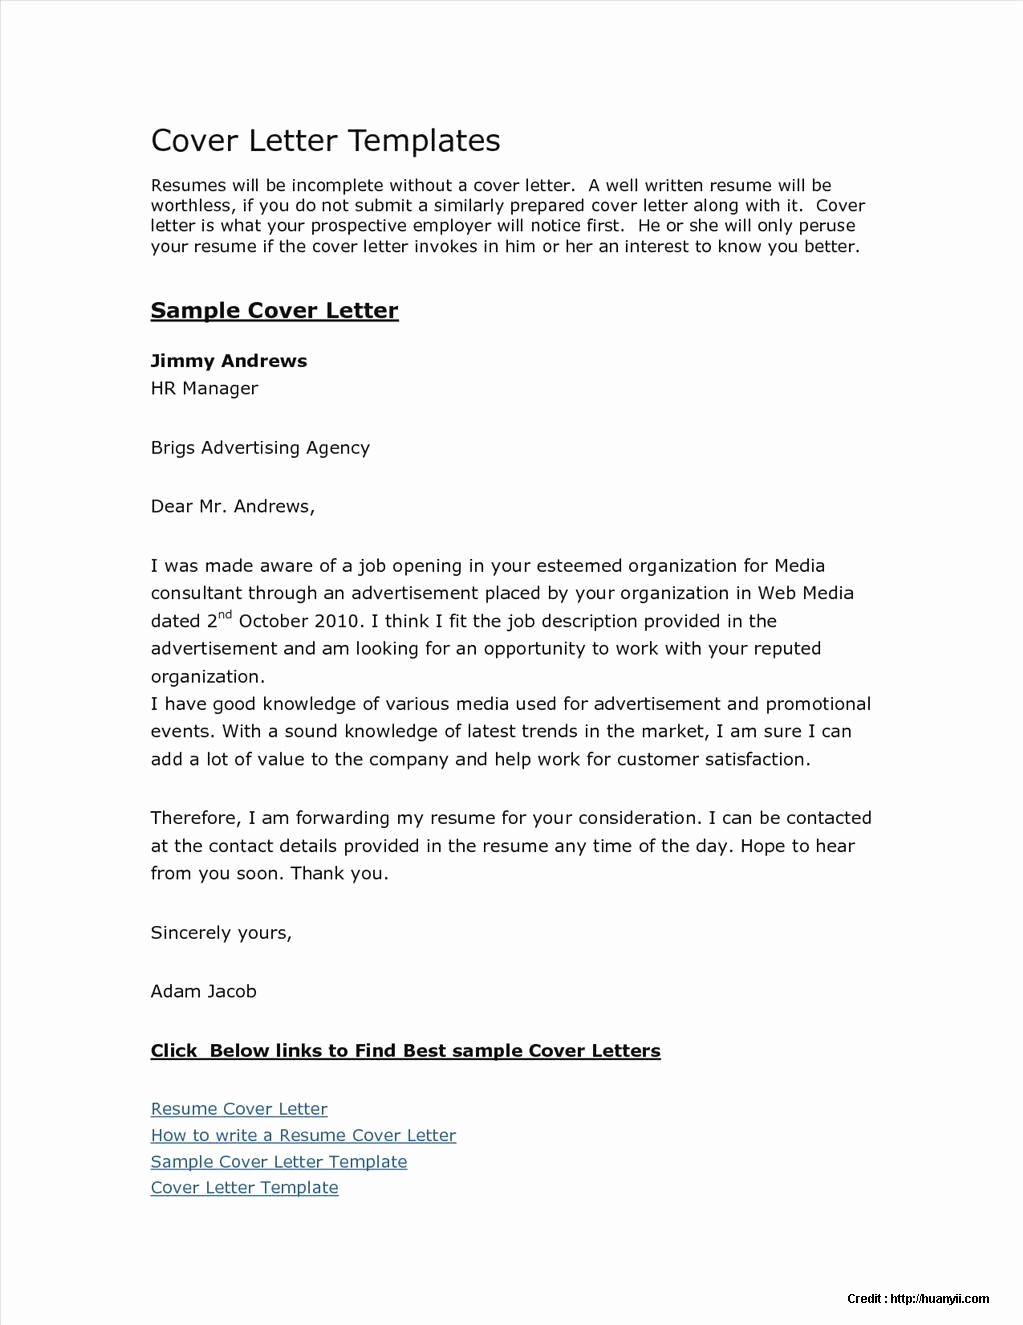 Cover Letter Template Free Download Elegant Free Cover Letter Templates Microsoft Download Cover